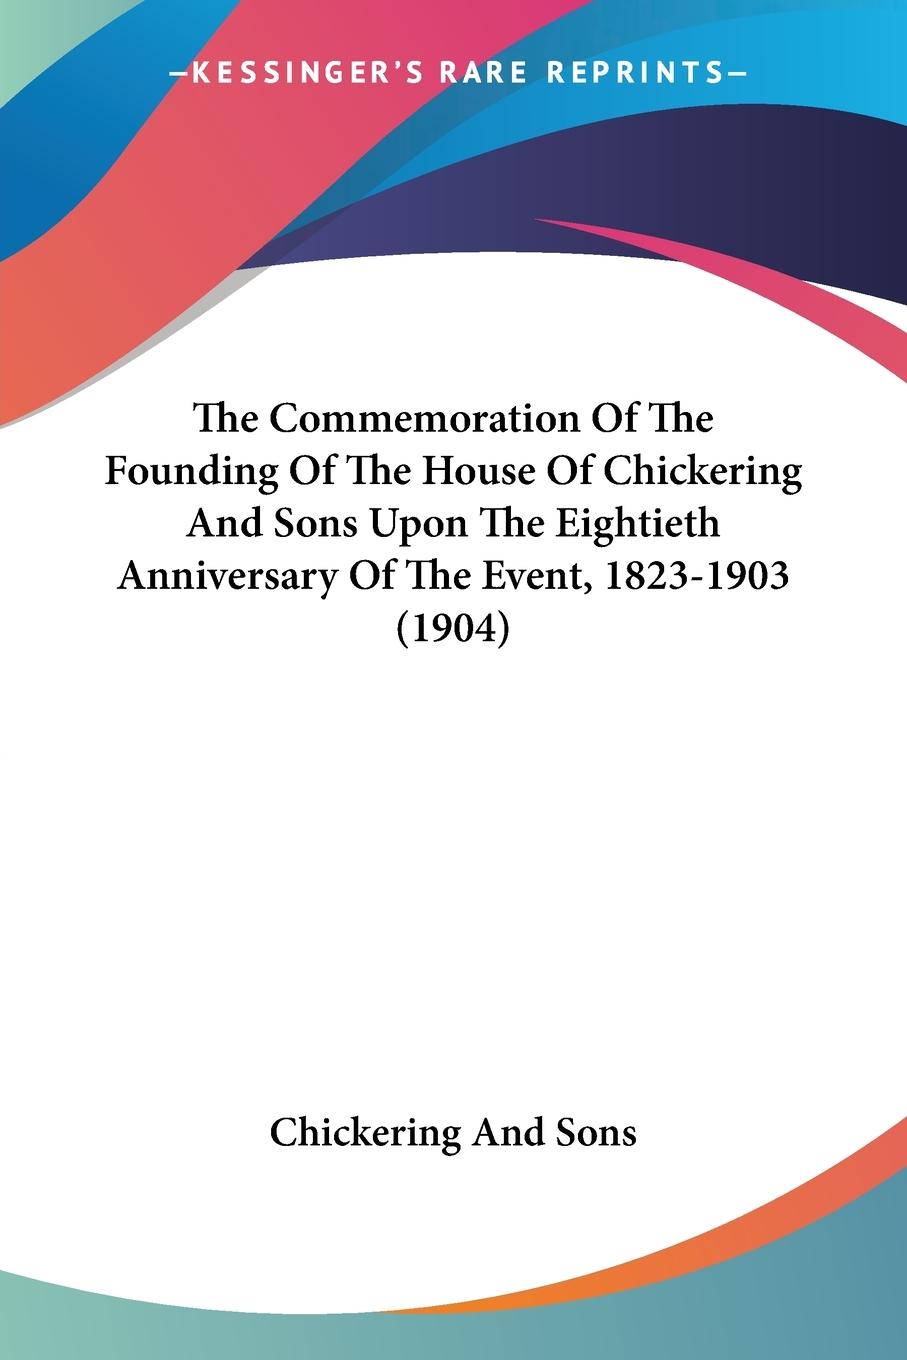 The Commemoration Of The Founding Of The House Of Chickering And Sons Upon The Eightieth Anniversary Of The Event, 1823-1903 (1904) - Chickering And Sons